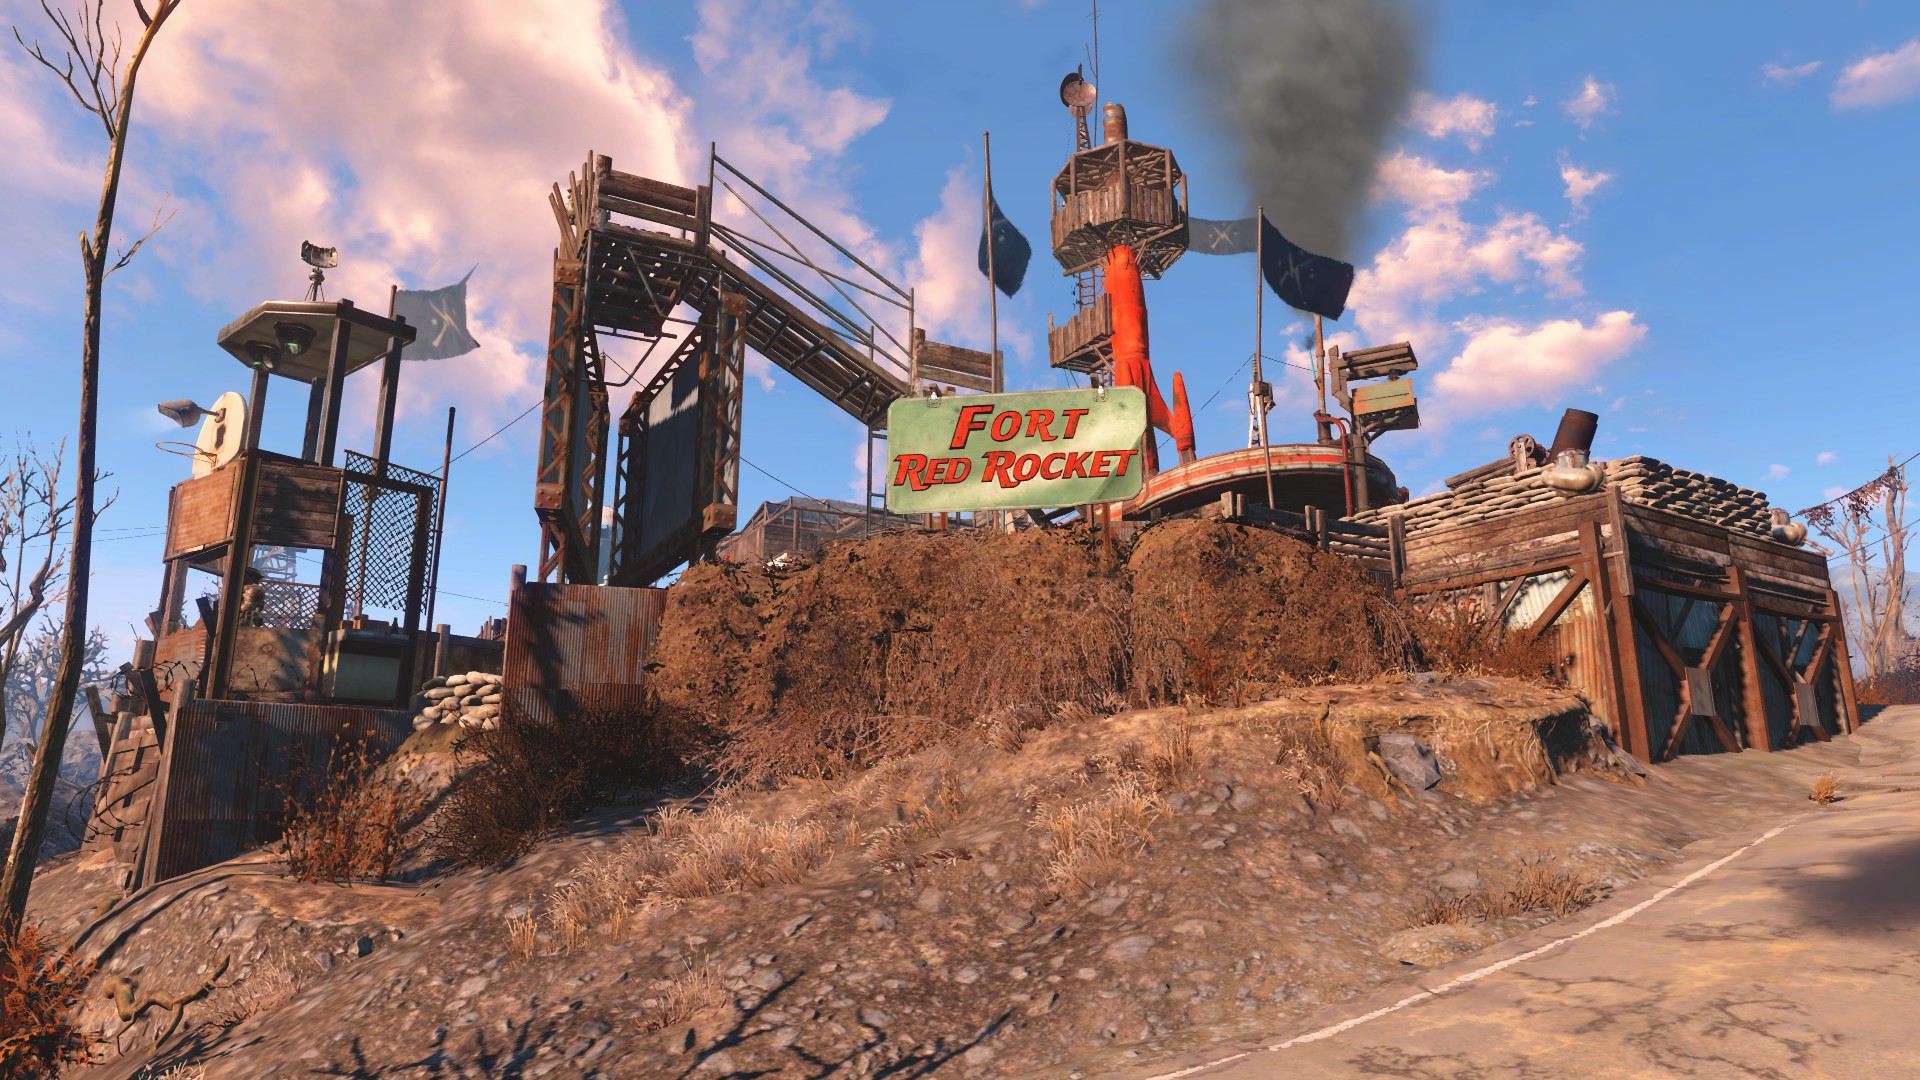 Sim settlements 2 chapter 2. Фоллаут 4 мод SIM Settlements Conqueror. Fallout 4 моды SIM Settlements - Conqueror. Ред рокет Оазис жб. City Plans SIM Settlements Fallout 4.